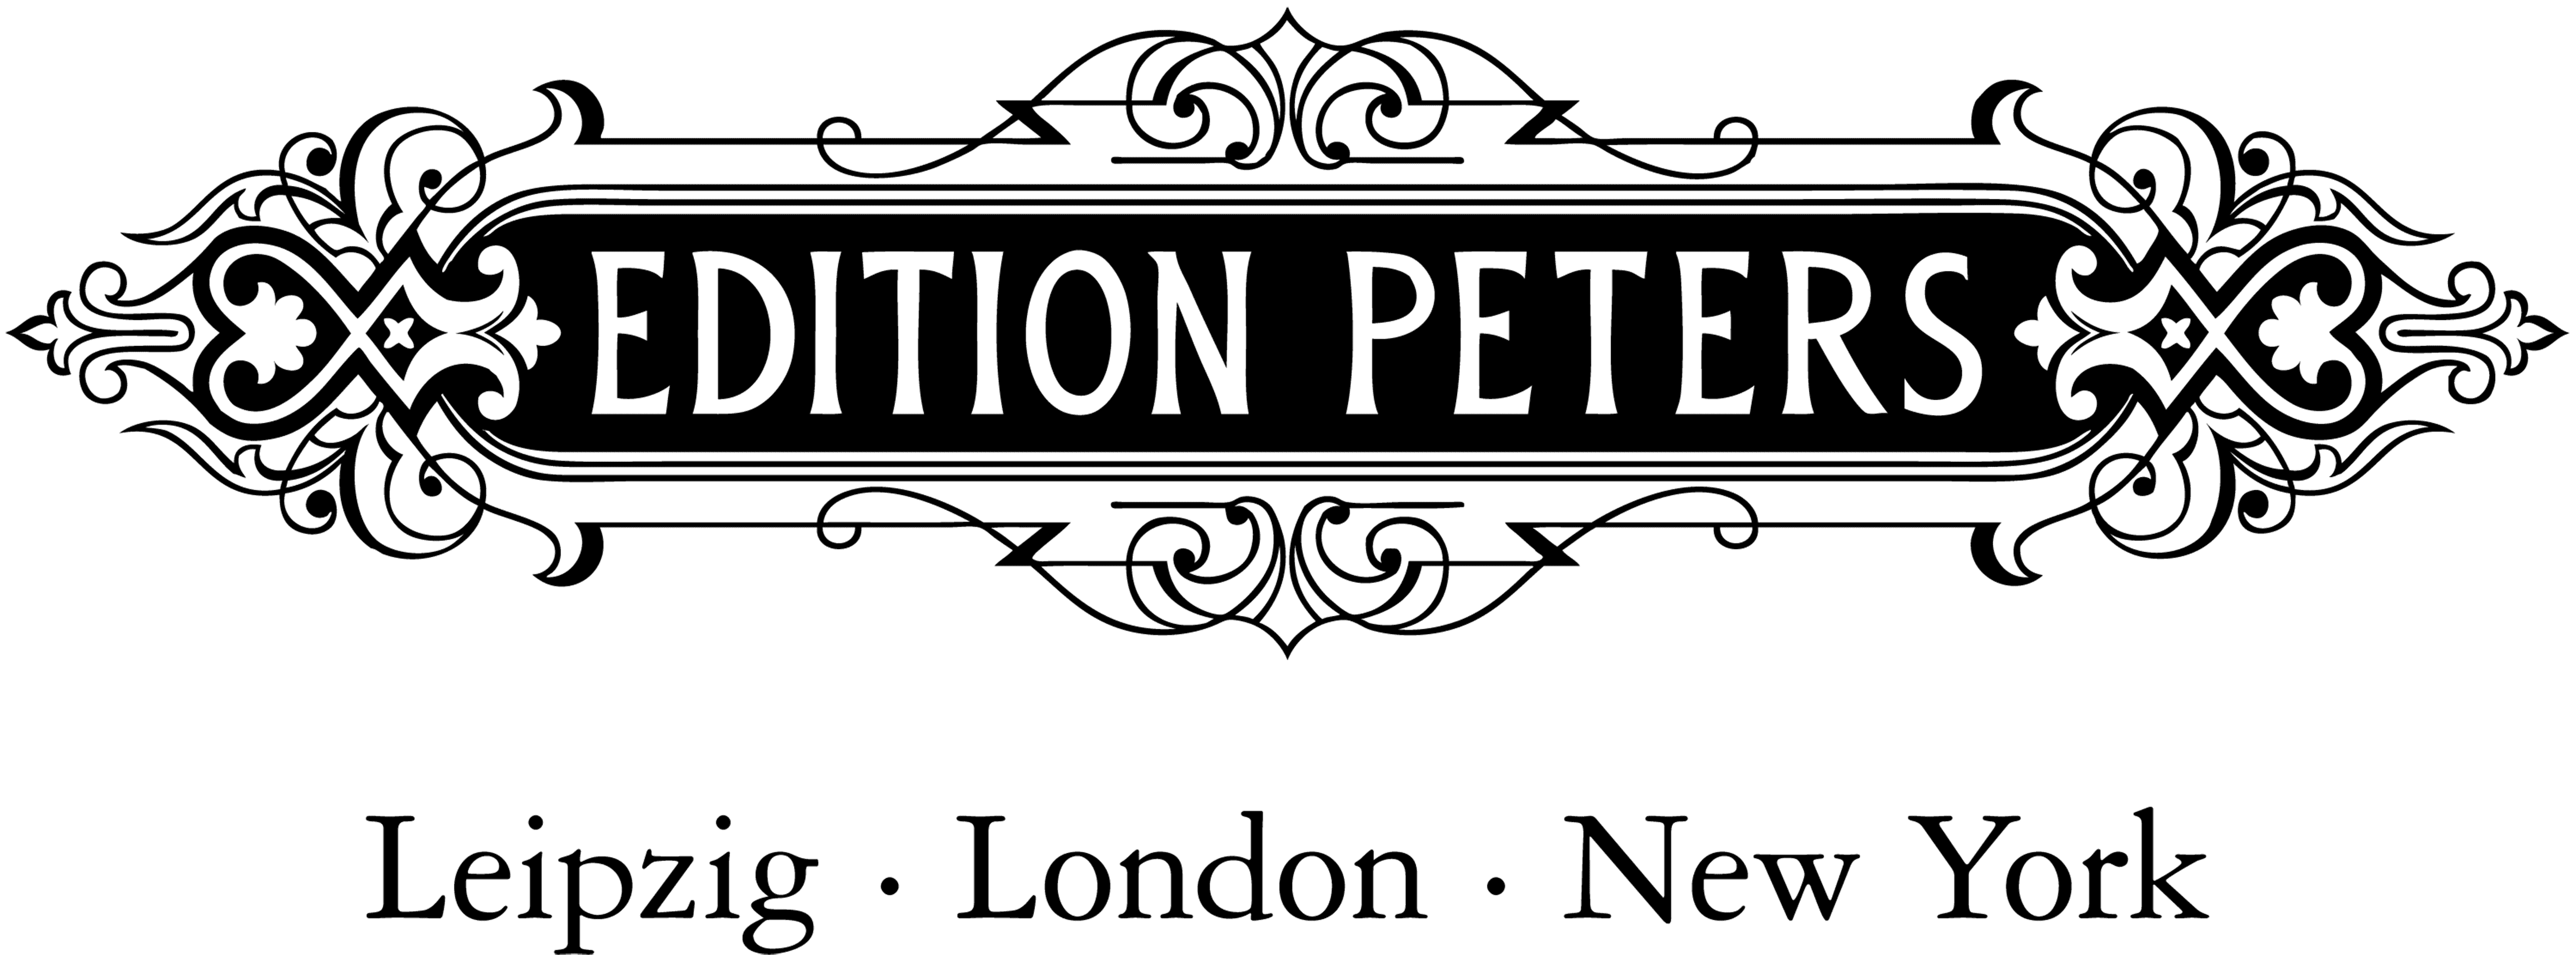 Edition Peters logo